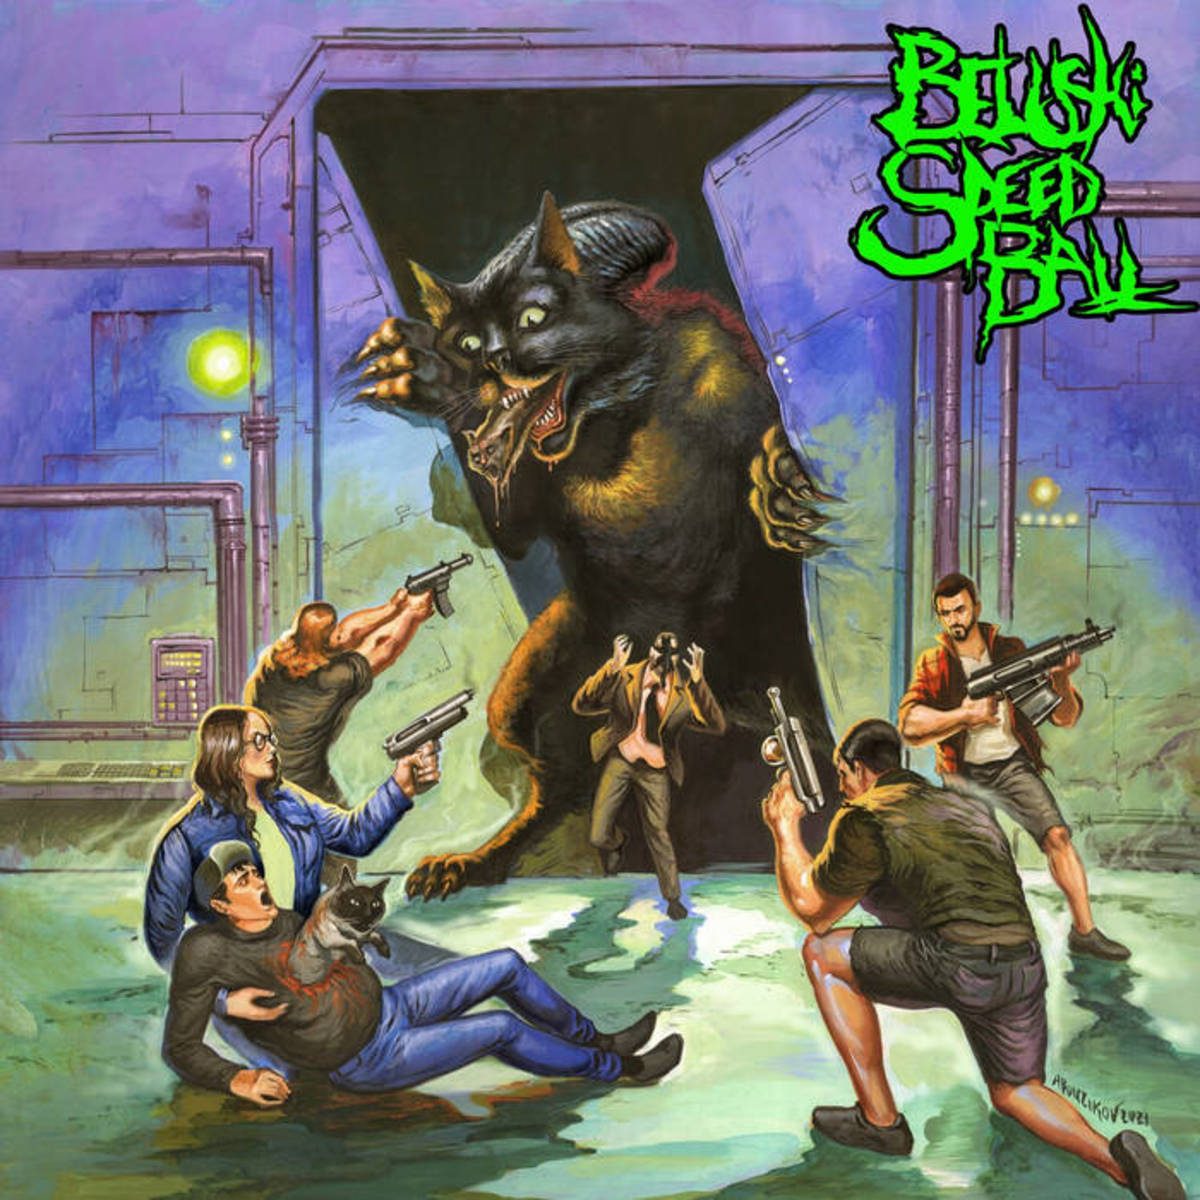 Review: What, Us Worry? By Crossover Thrash Metal Band Belushi Speed Ball